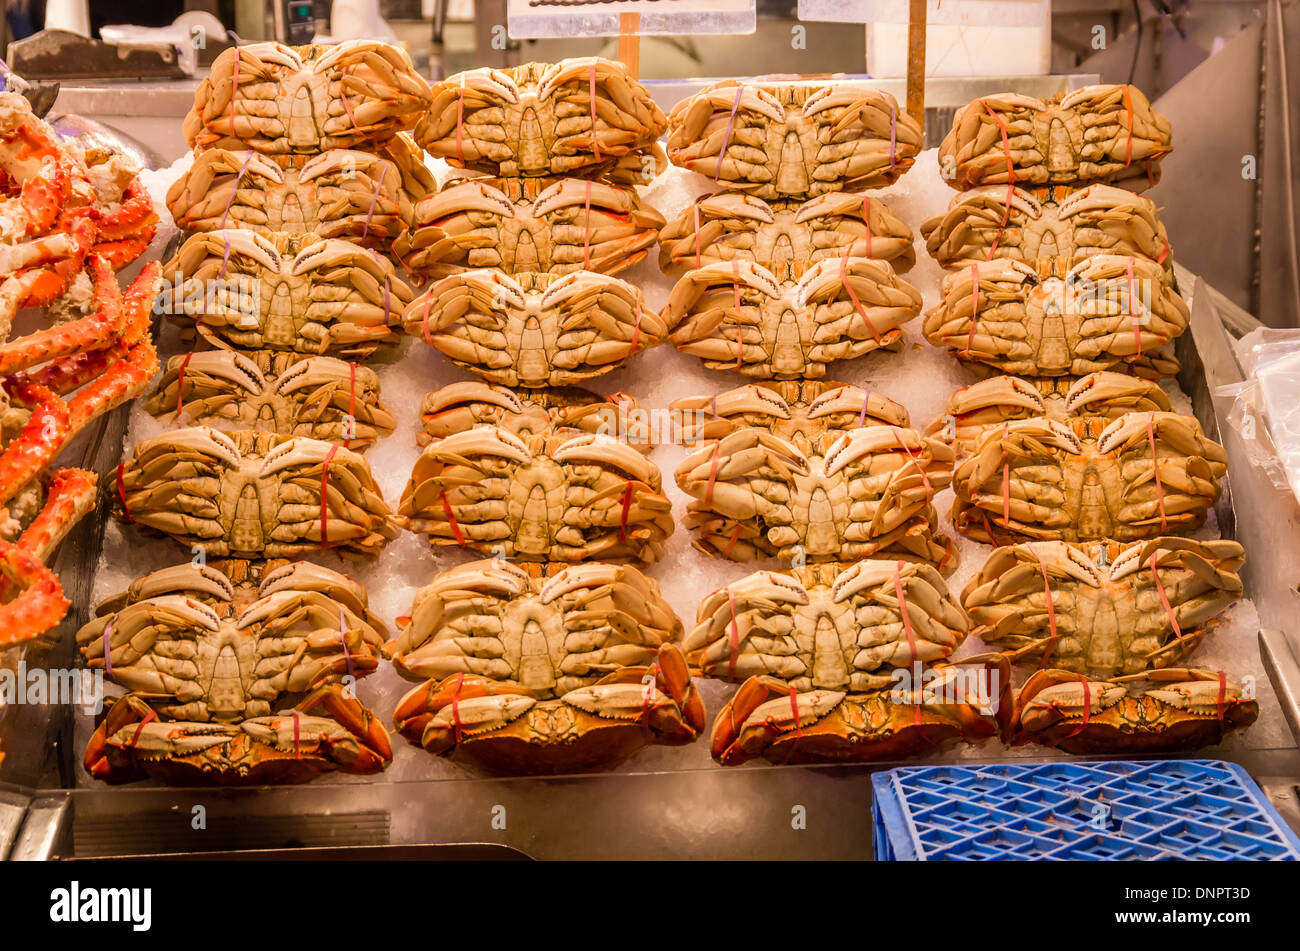 Dungeness crab on ice at a fish monger's market stall Pike Place Market Seattle, Washington, USA Stock Photo